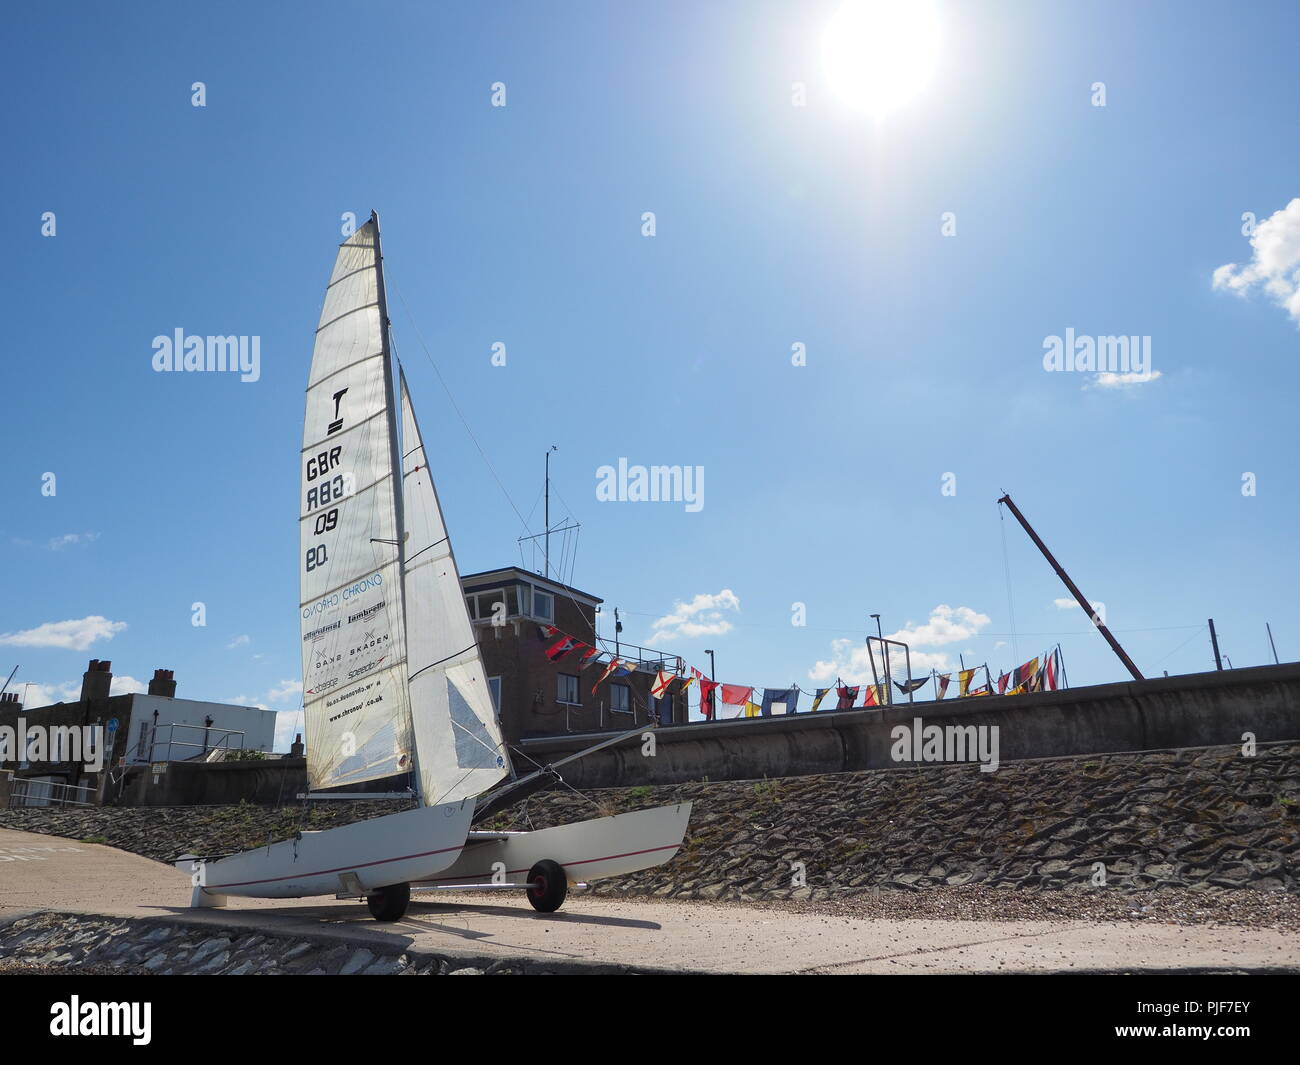 Sheerness, Kent, UK. 7th Sep, 2018. UK Weather: a sunny day with blues skies in Sheerness, Kent. A competitor sailing a Tornado class catamaran arrives for the 60th Round the Isle Of Sheppey Race, which takes place this weekend. The race is organised by the Isle Of Sheppey Sailing Club and is open to sailing dinghies, catamarans and sailboards. Around 100 craft are expected to take part in the 40-mile circumnavigation of the island on Sunday. Credit: James Bell/Alamy Live News Stock Photo